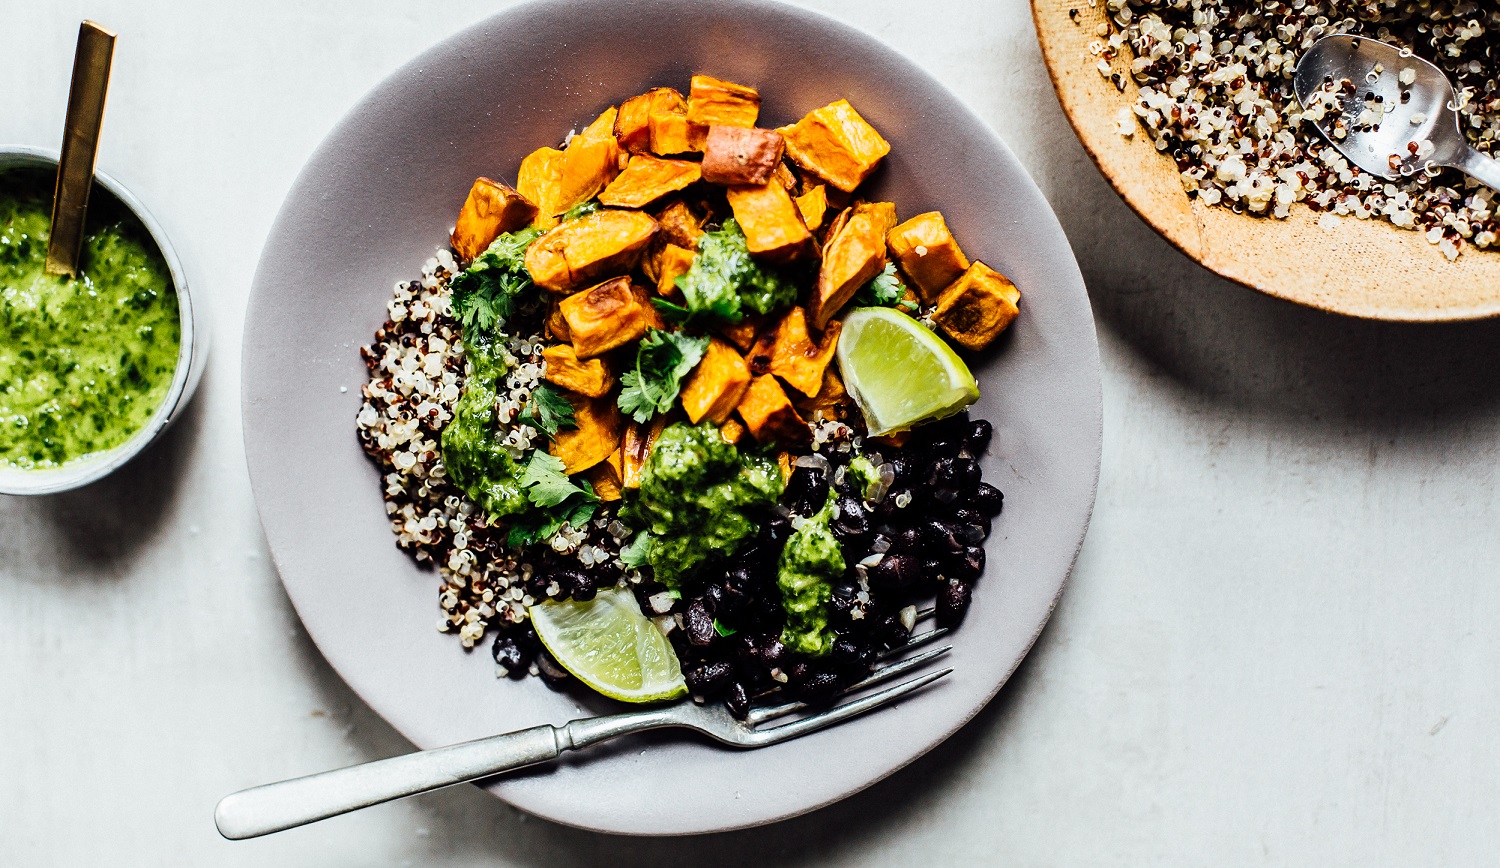 Image for Budget Cooking: Quinoa, Black Bean & Sweet Potato Bowls with Green Sauce